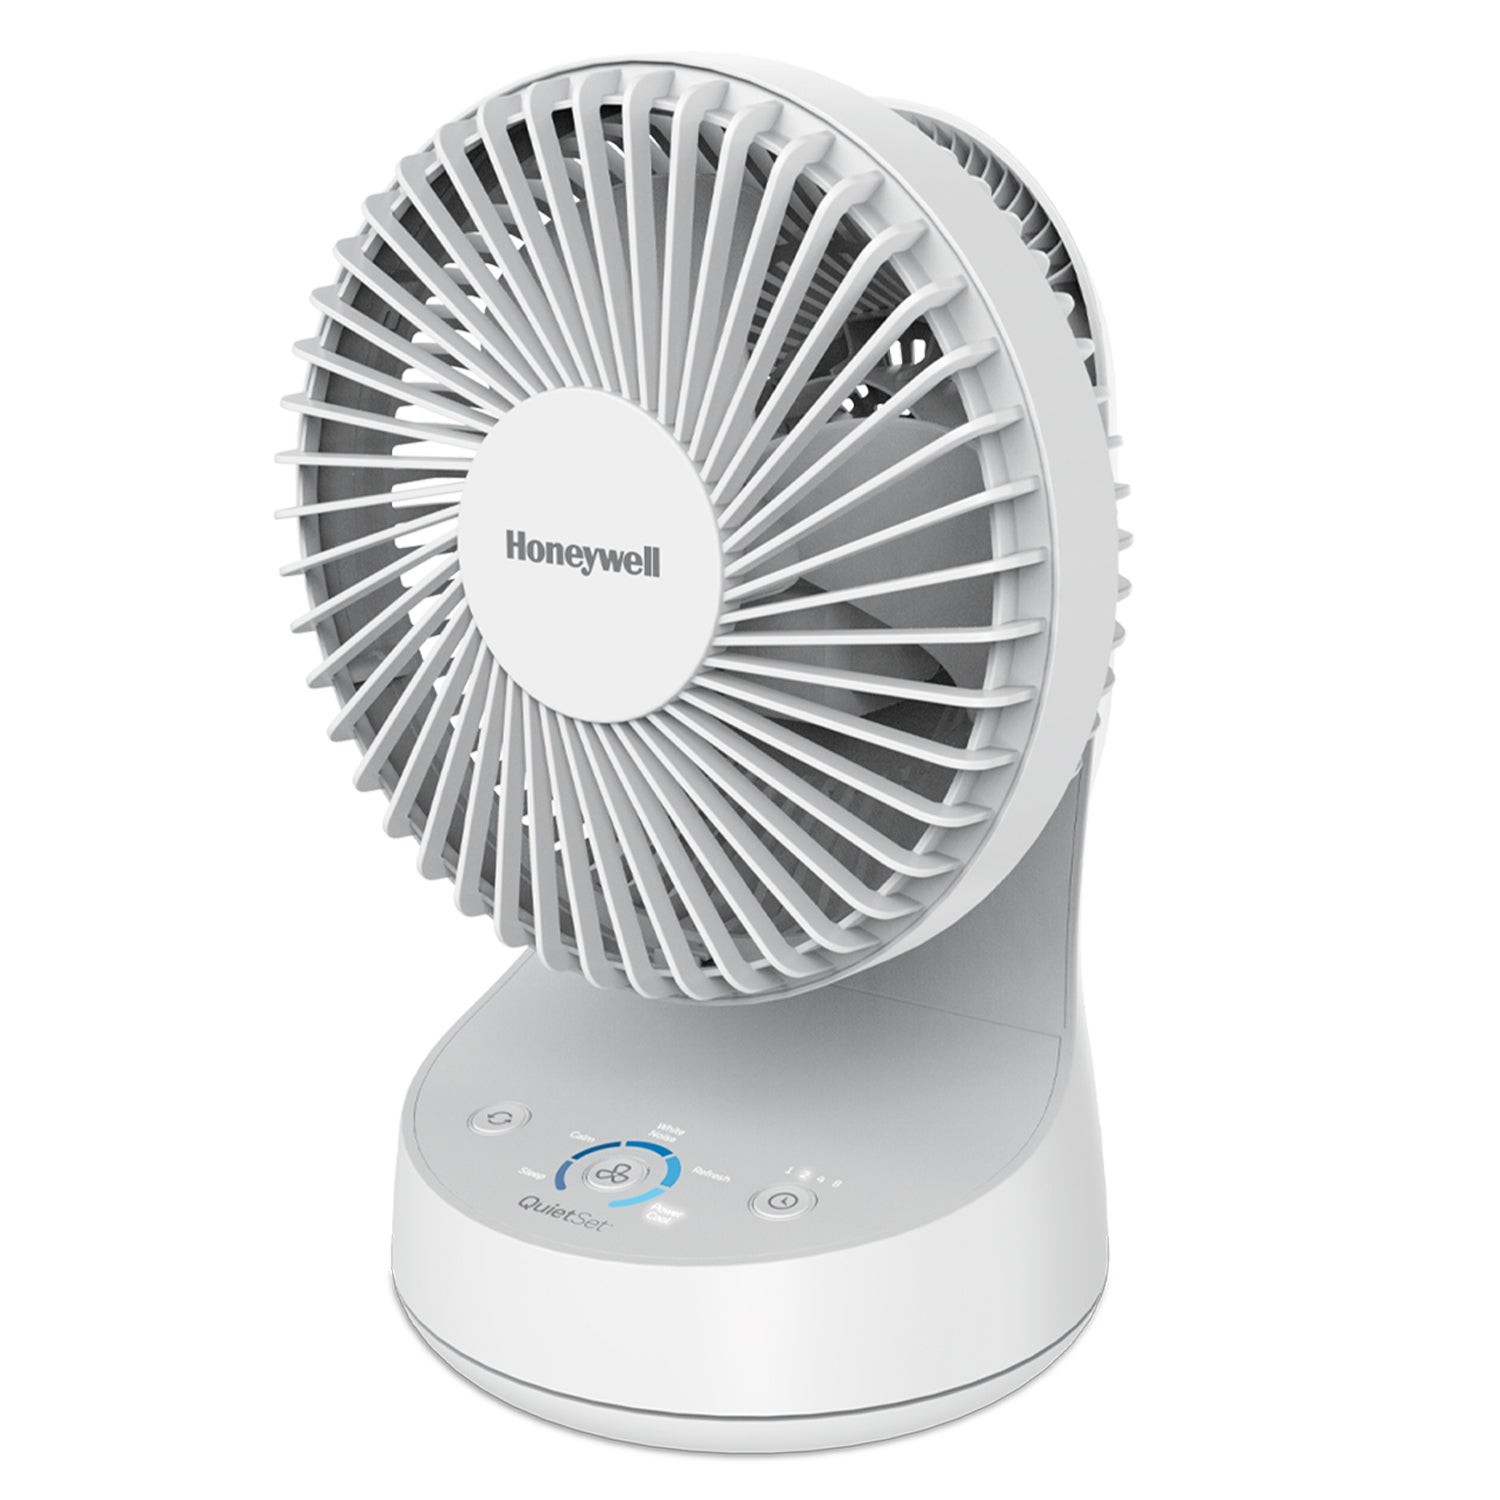 QuietSet 5 Oscillating Table Fan White